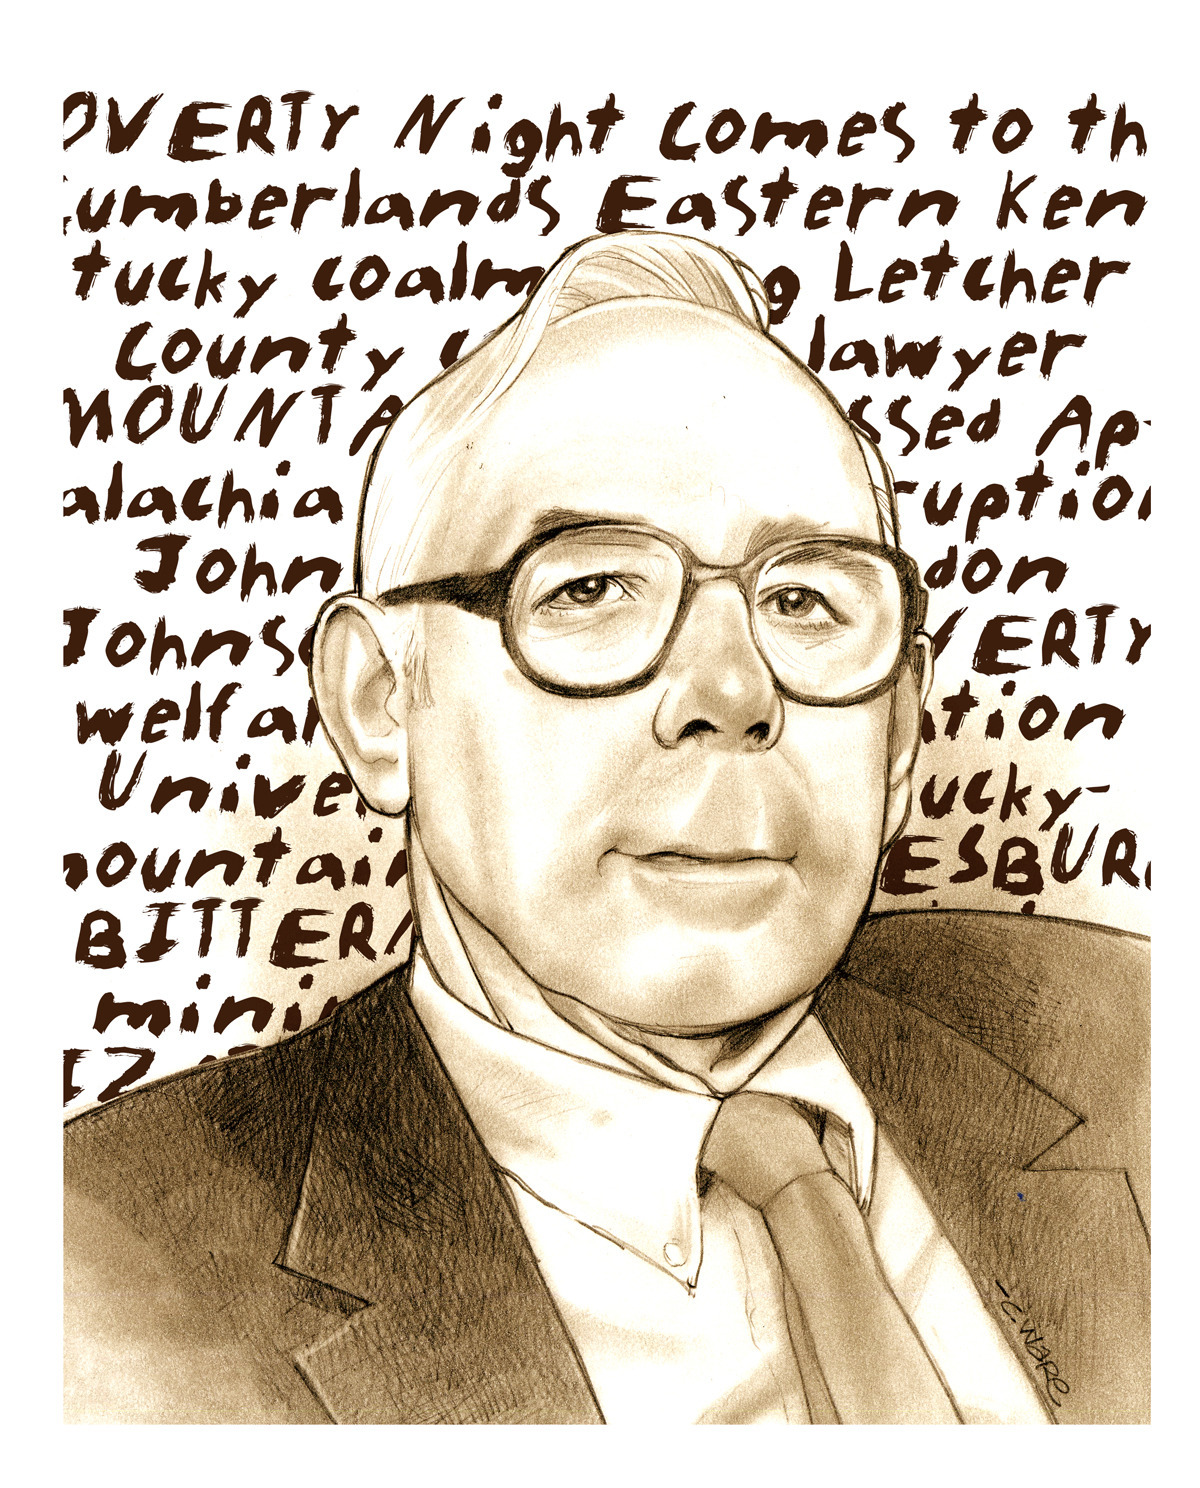 Illustration of Harry Caudill by Chris Ware | Herald-Leader